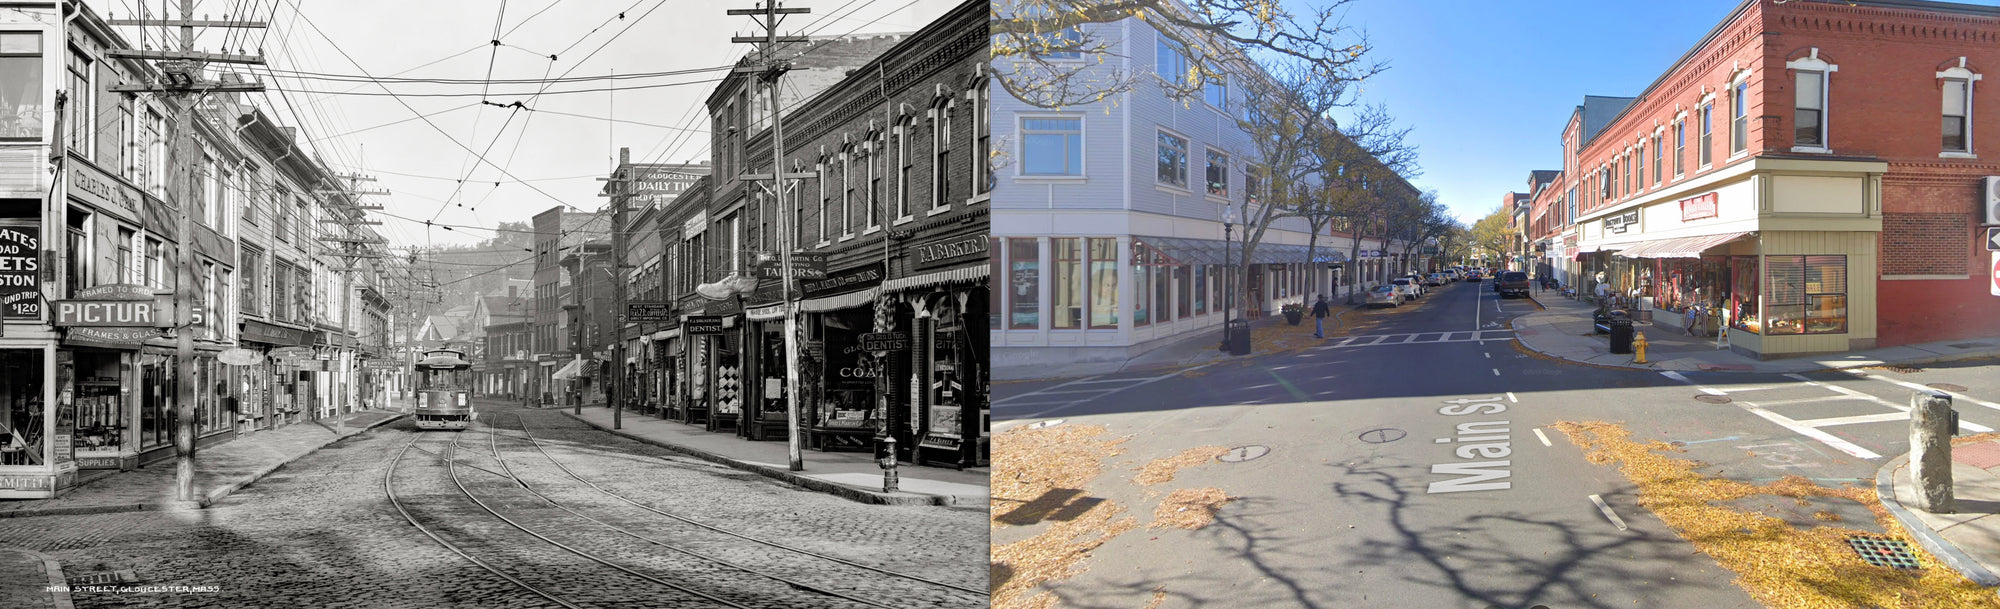 Main and Hancock Streets, Gloucester Massachusetts, Then and now